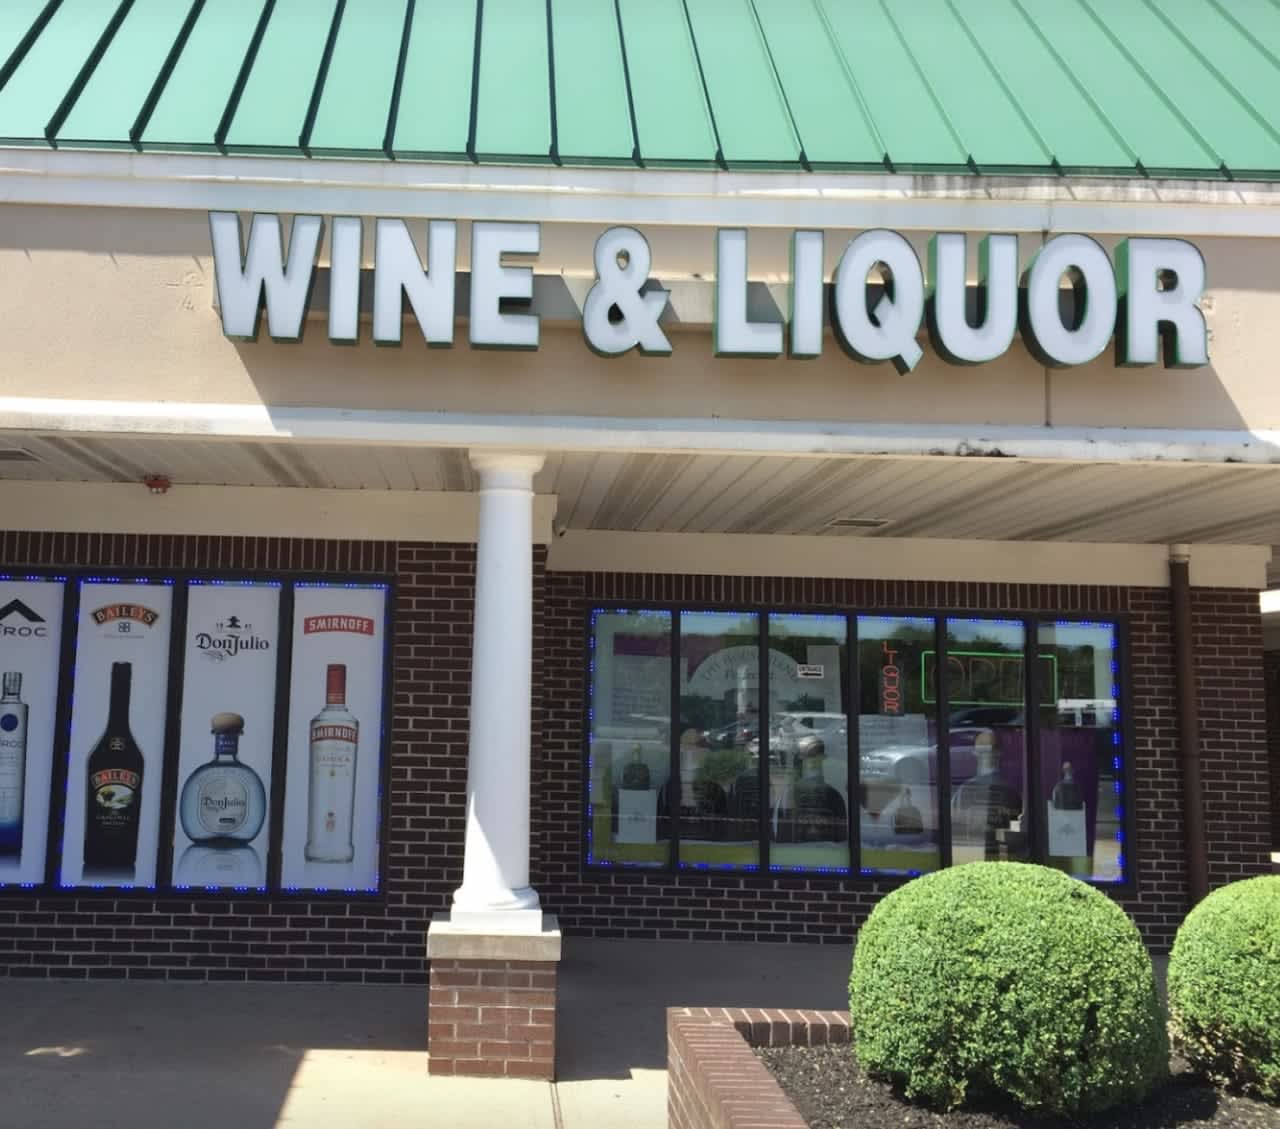 Peconic Wine & Liquor on Old Country Road in Riverhead